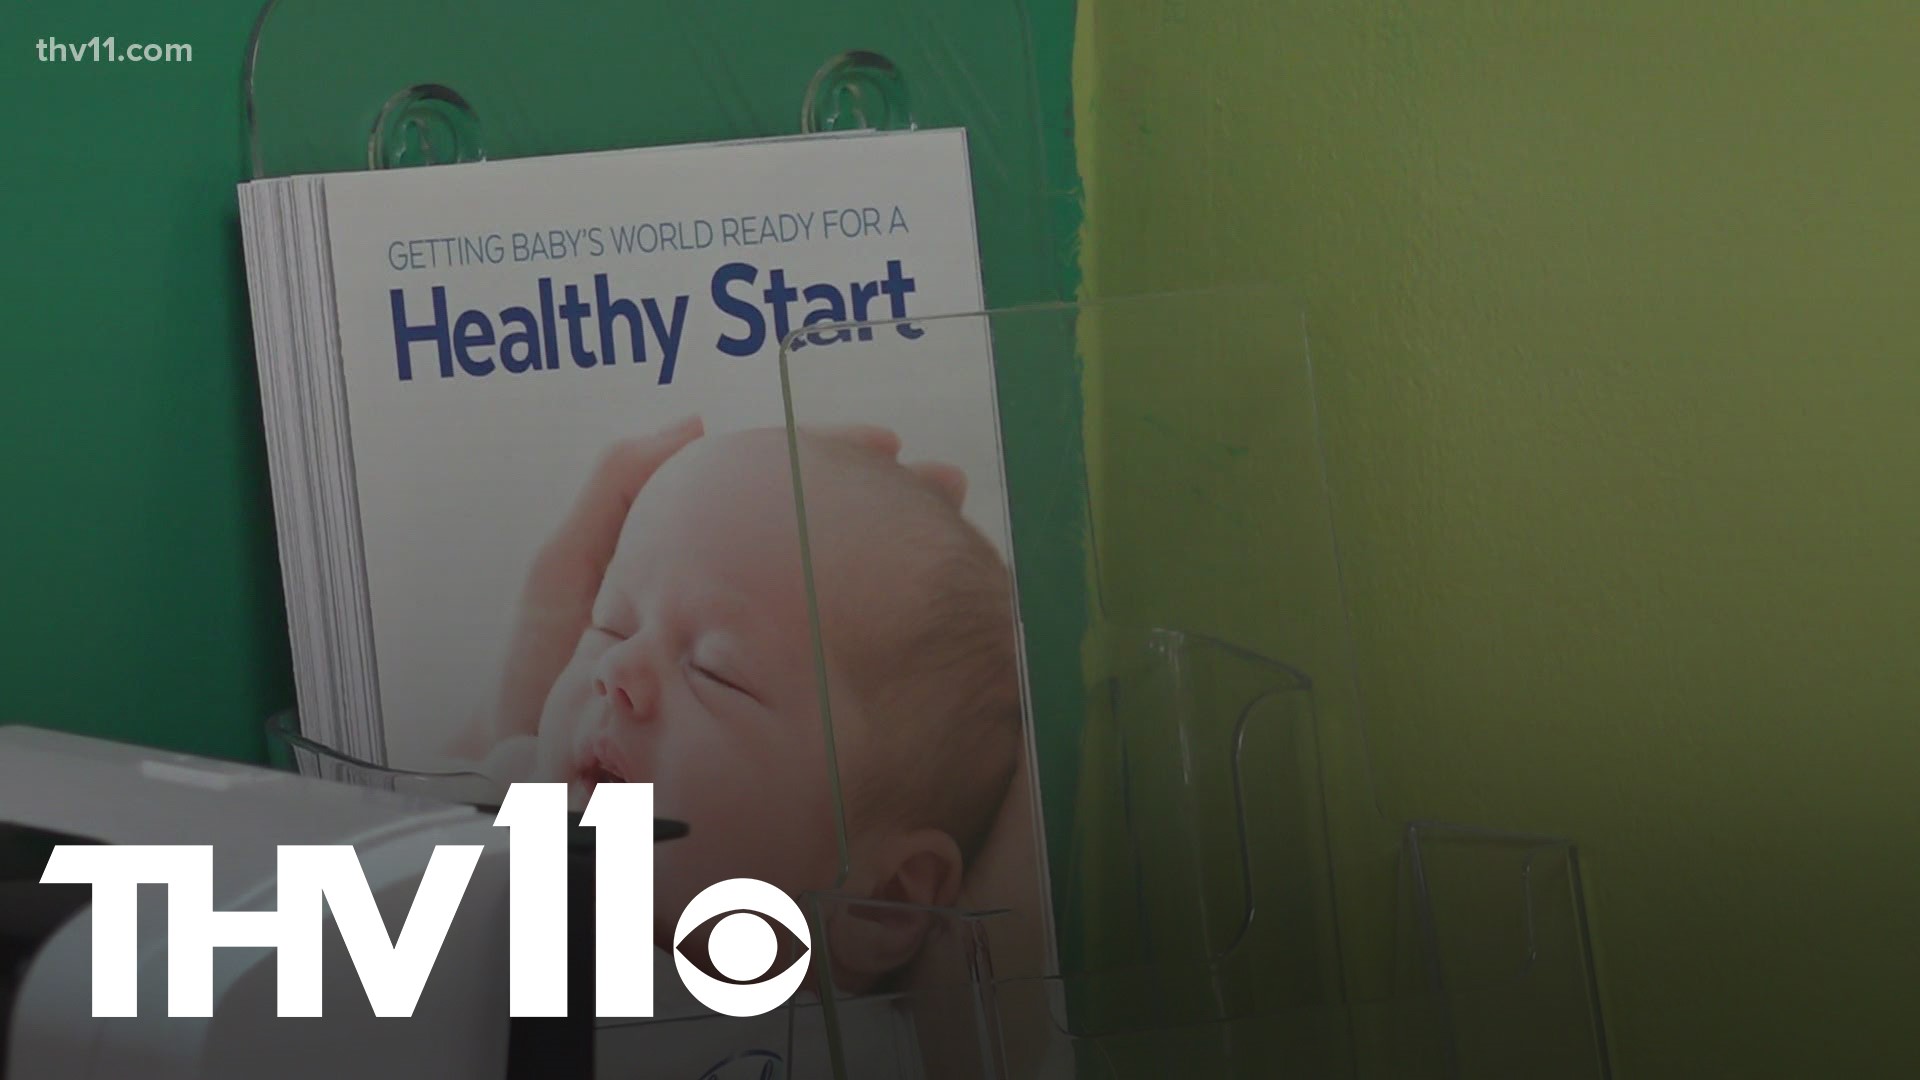 THV11 took six of the most common questions to Dr. Chad Rodgers, a partner at Little Rock Pediatric Clinic.